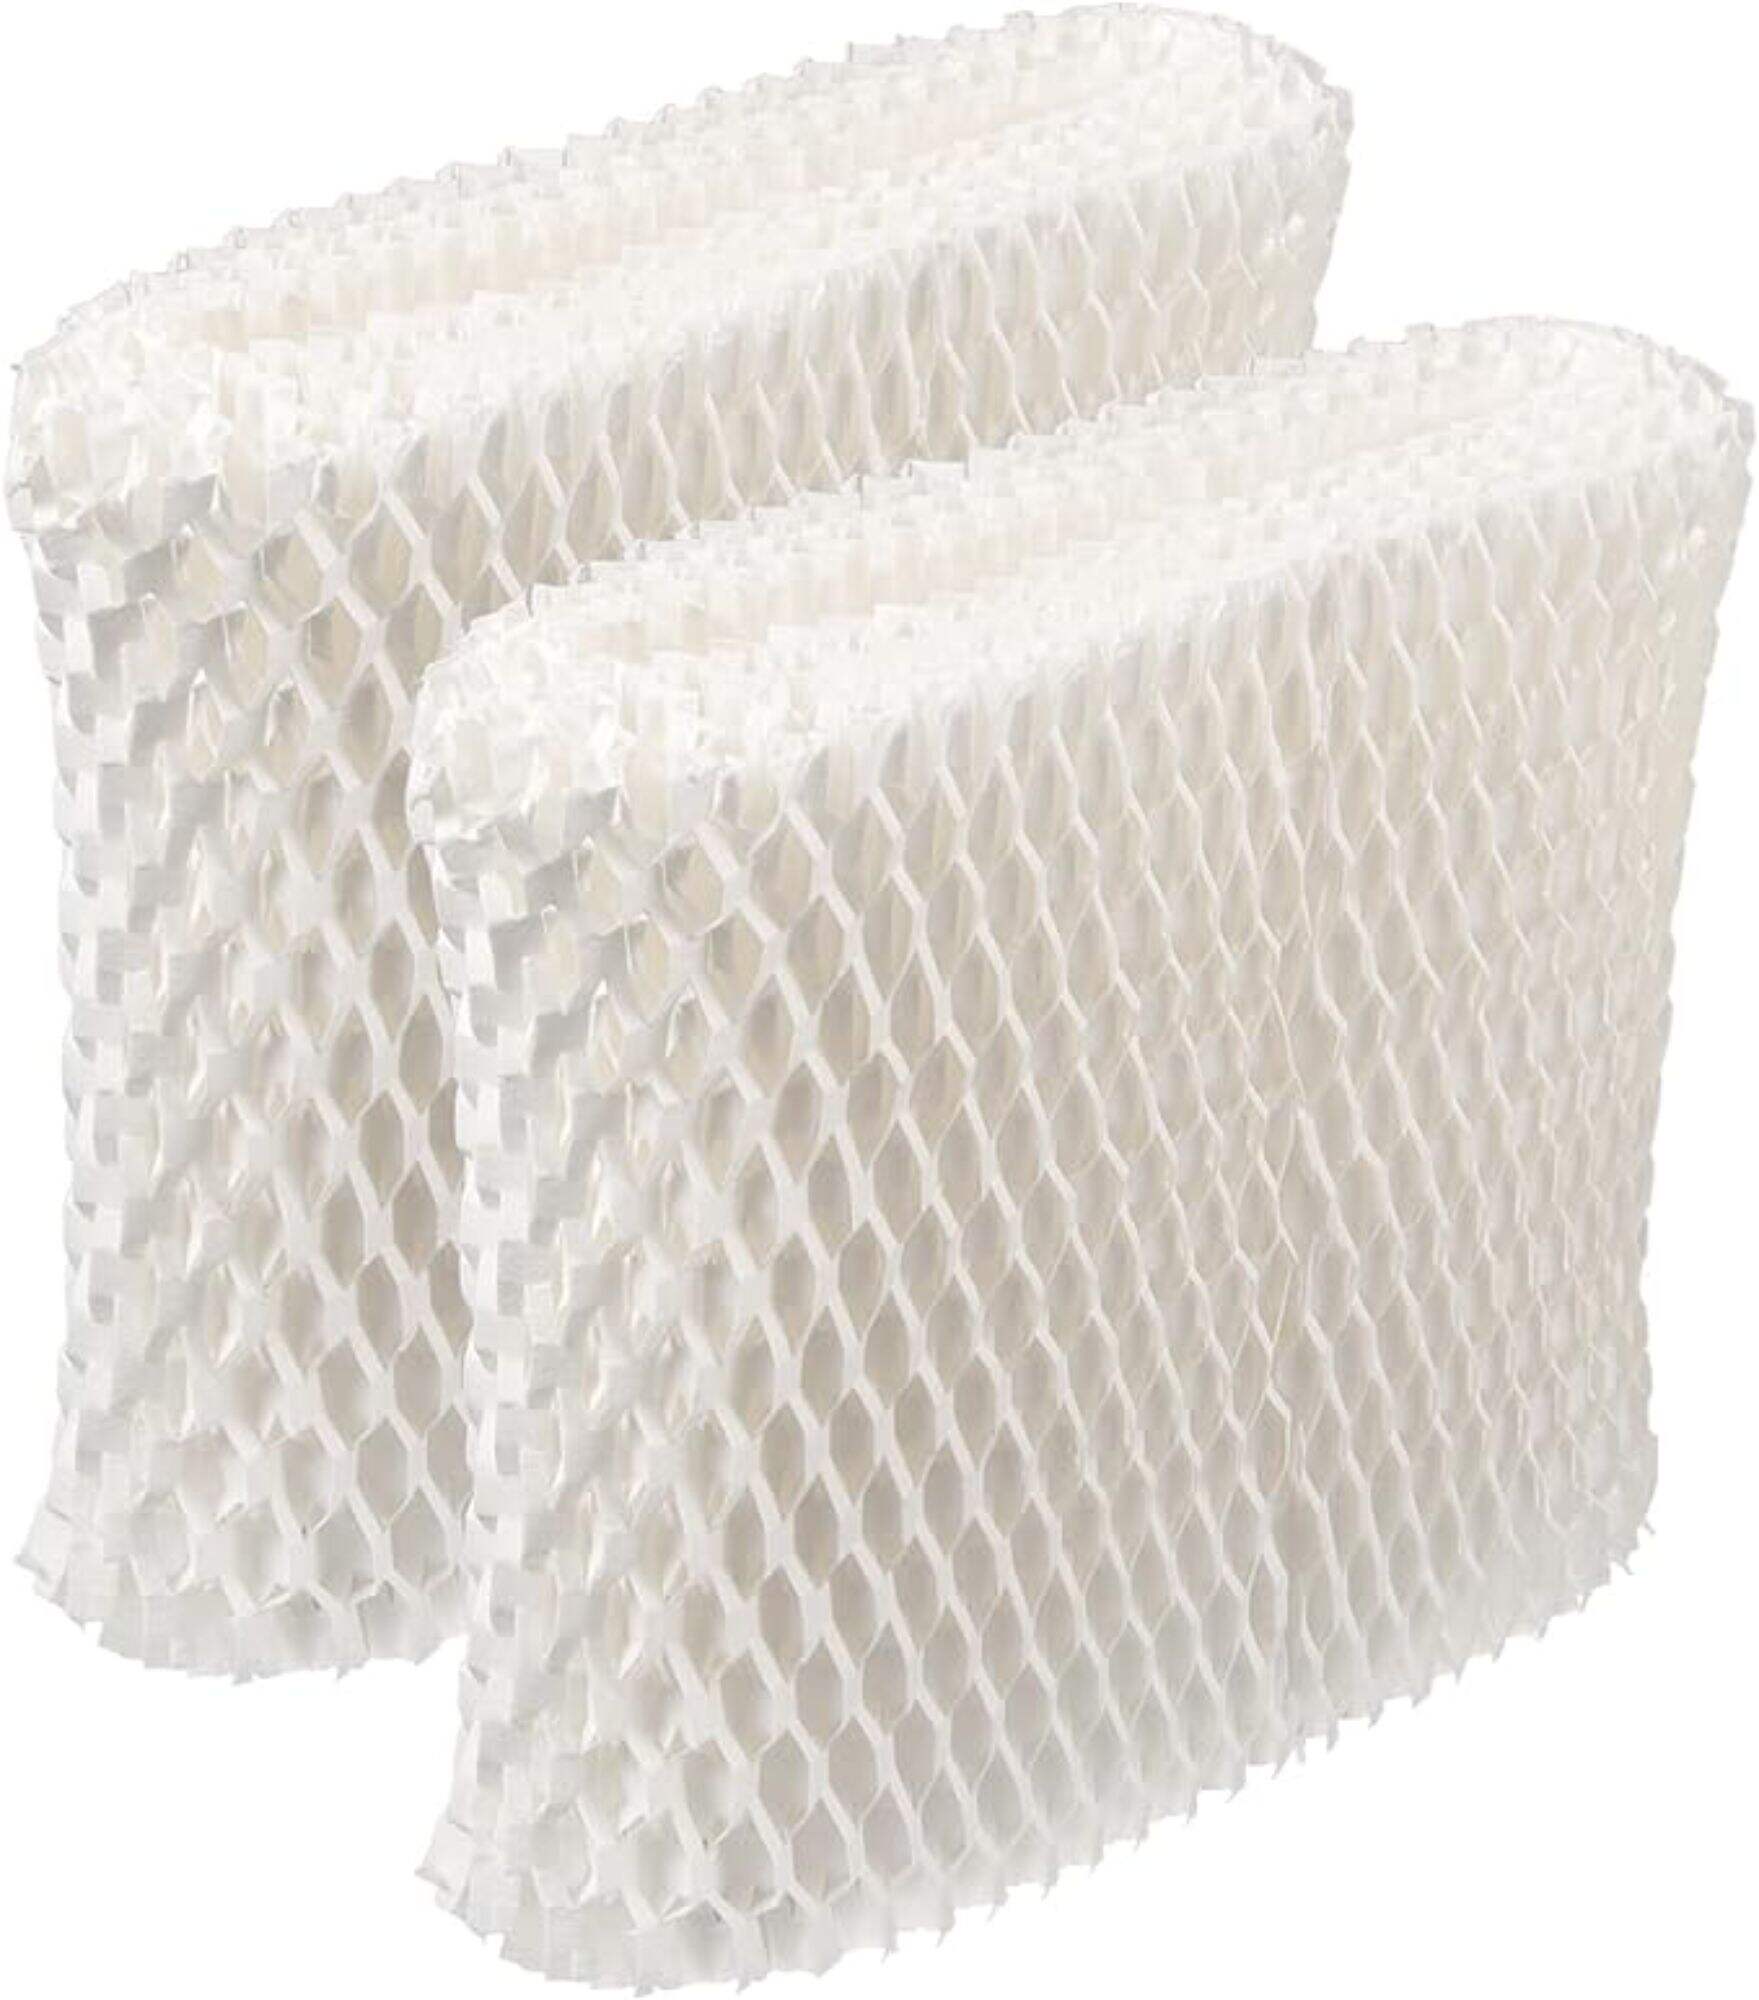 Customized Humidifier Filter Anti bacterial Wood Pulp Paper Wick Filter